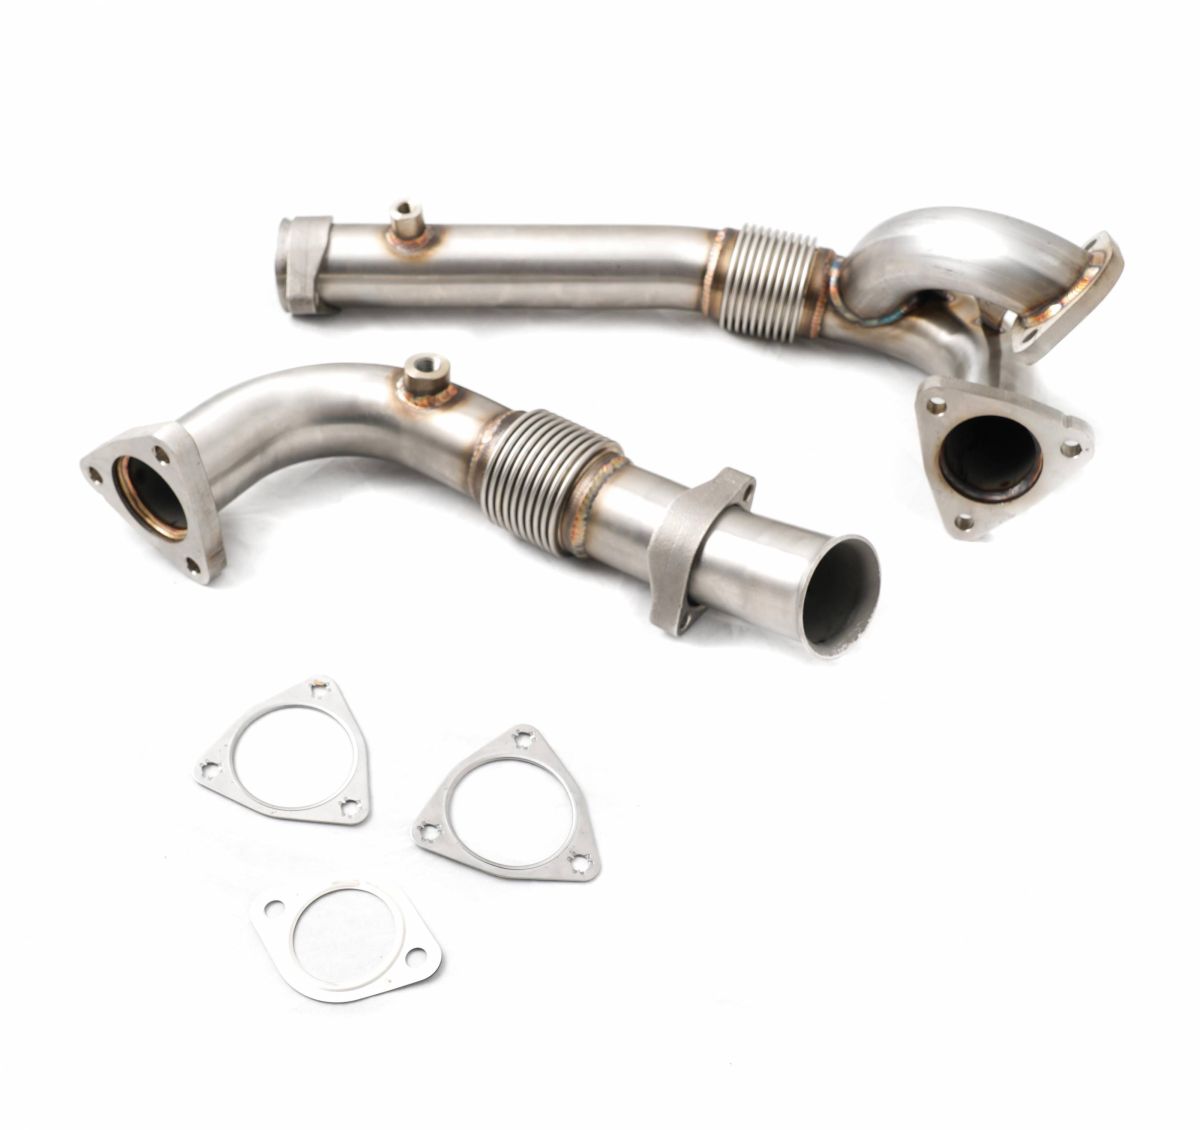 Rudy's Performance Parts - Rudy's High Flow Up Pipe Kit For 6.0 Exhaust Manifolds For 08-10 6.4 Powerstroke